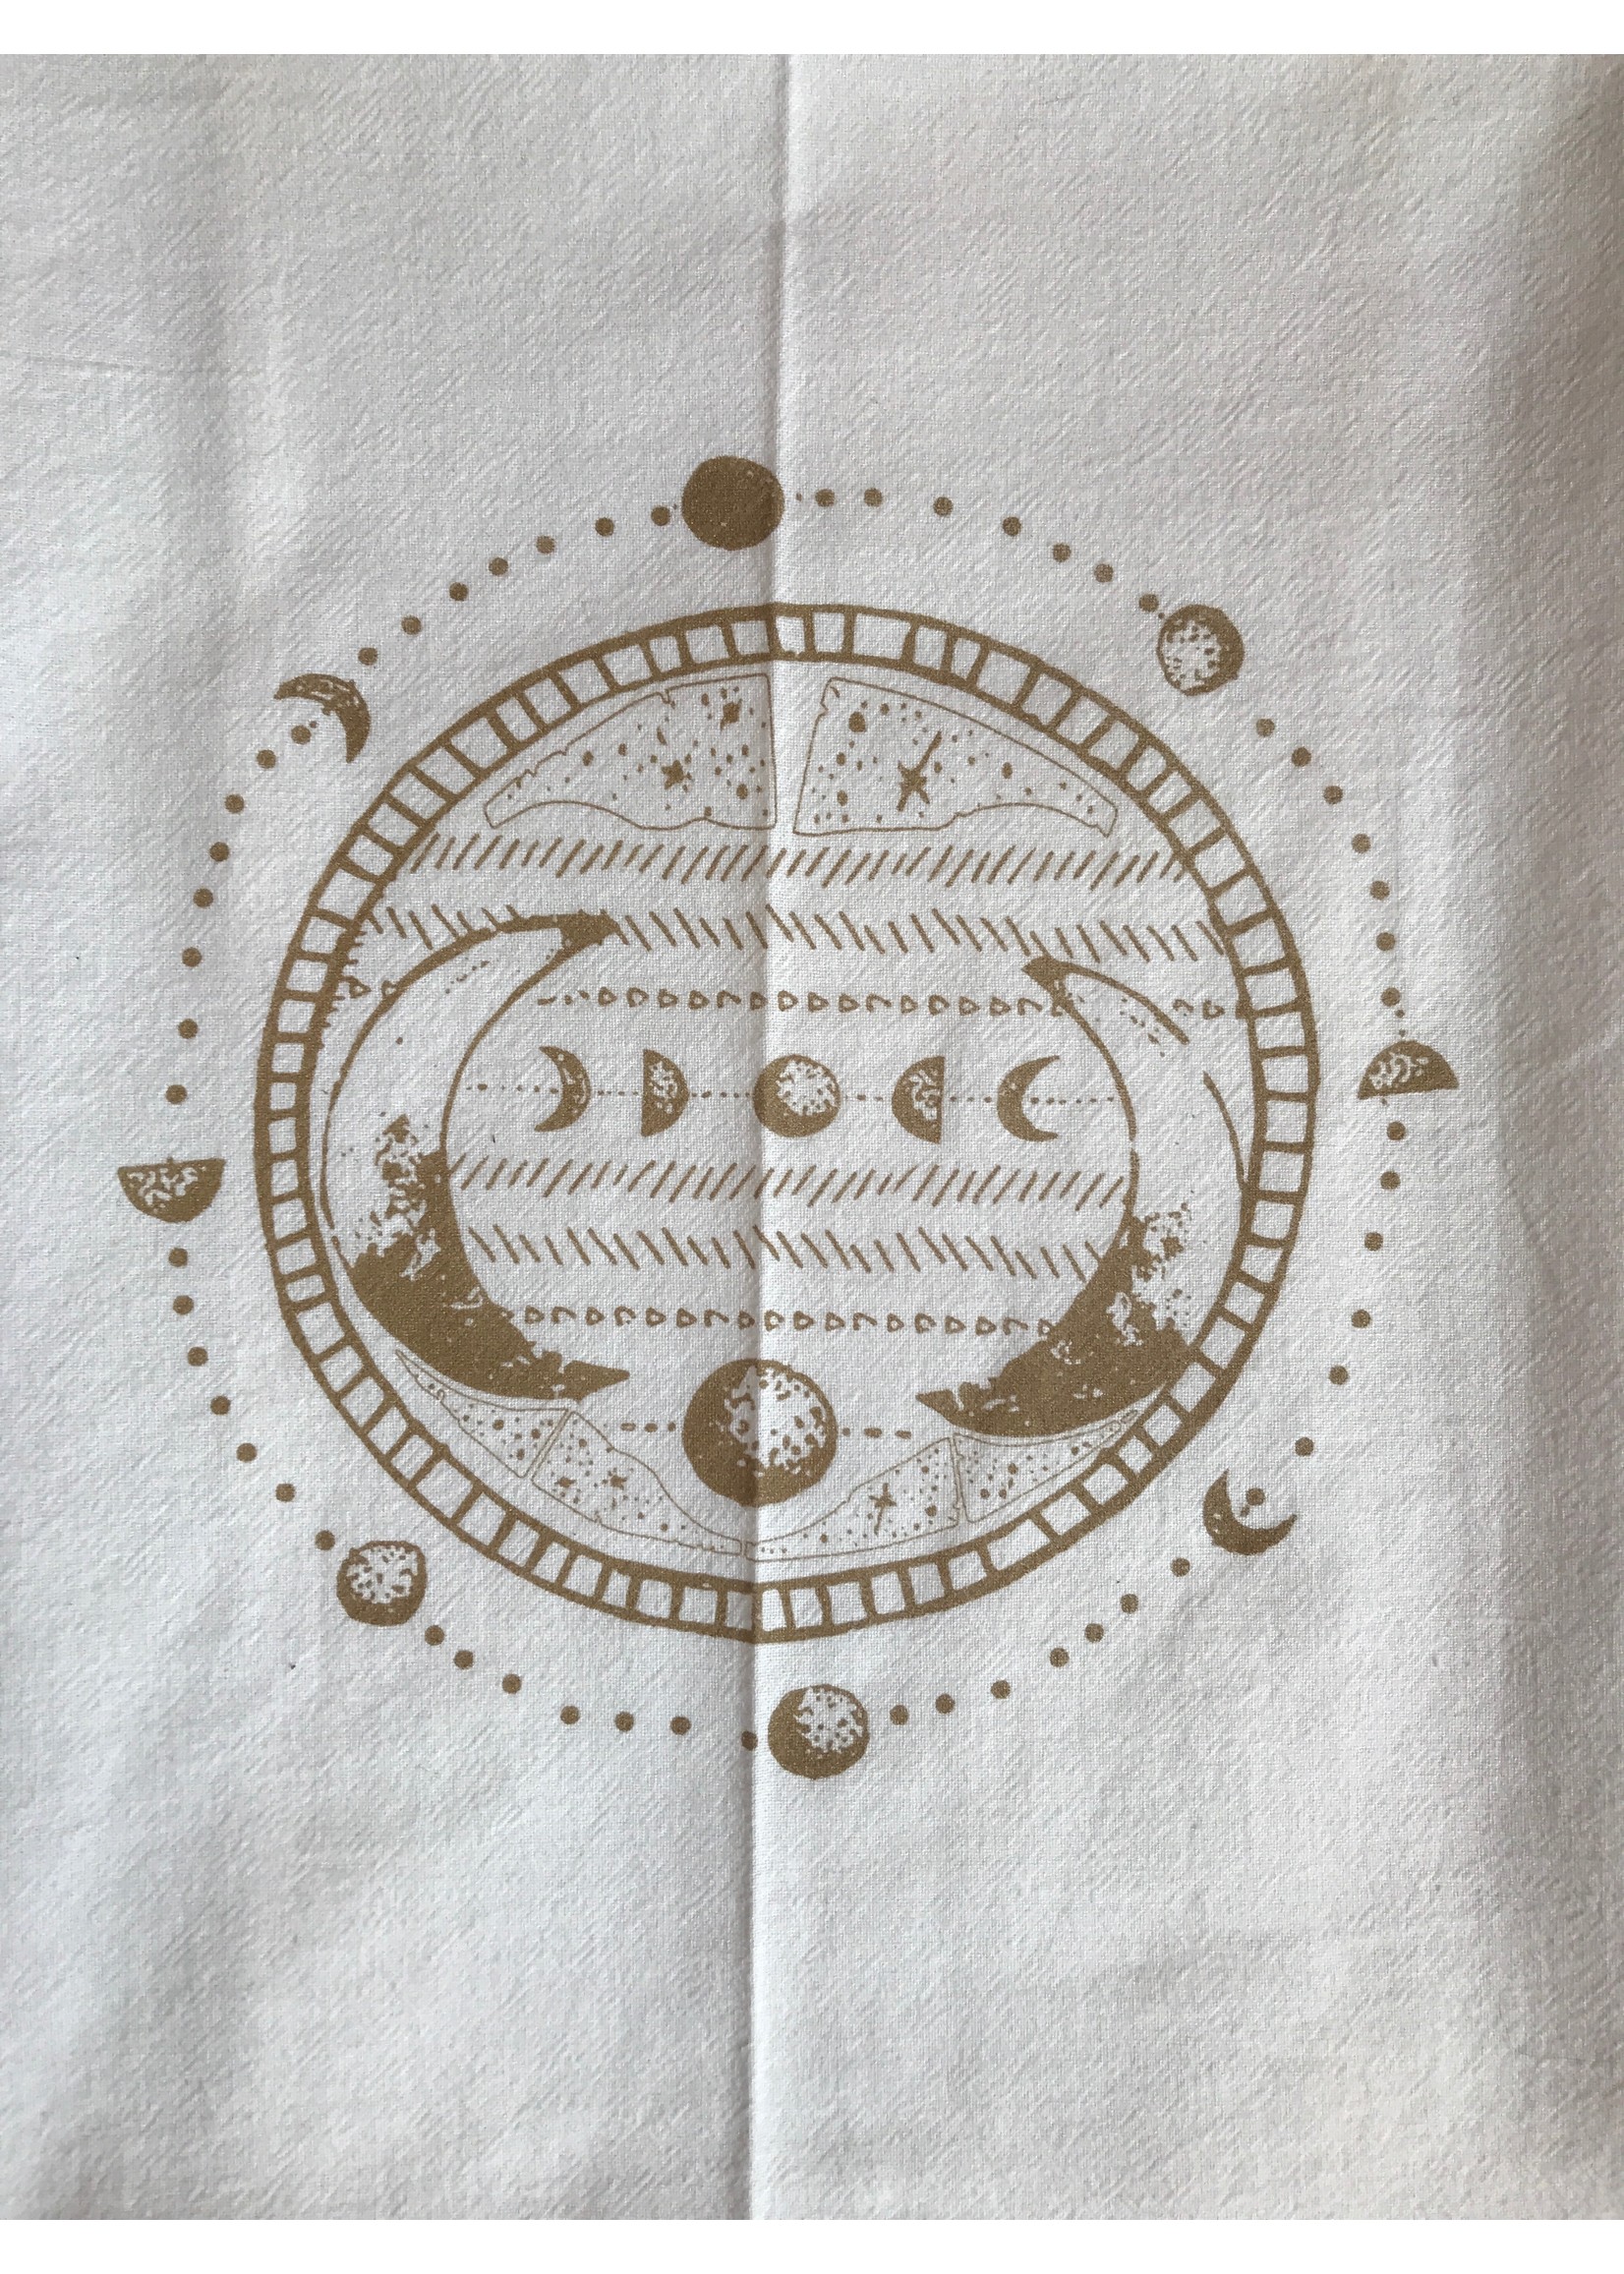 Tangled Up In Hue Screen Printed Dish Towel Moon Phase